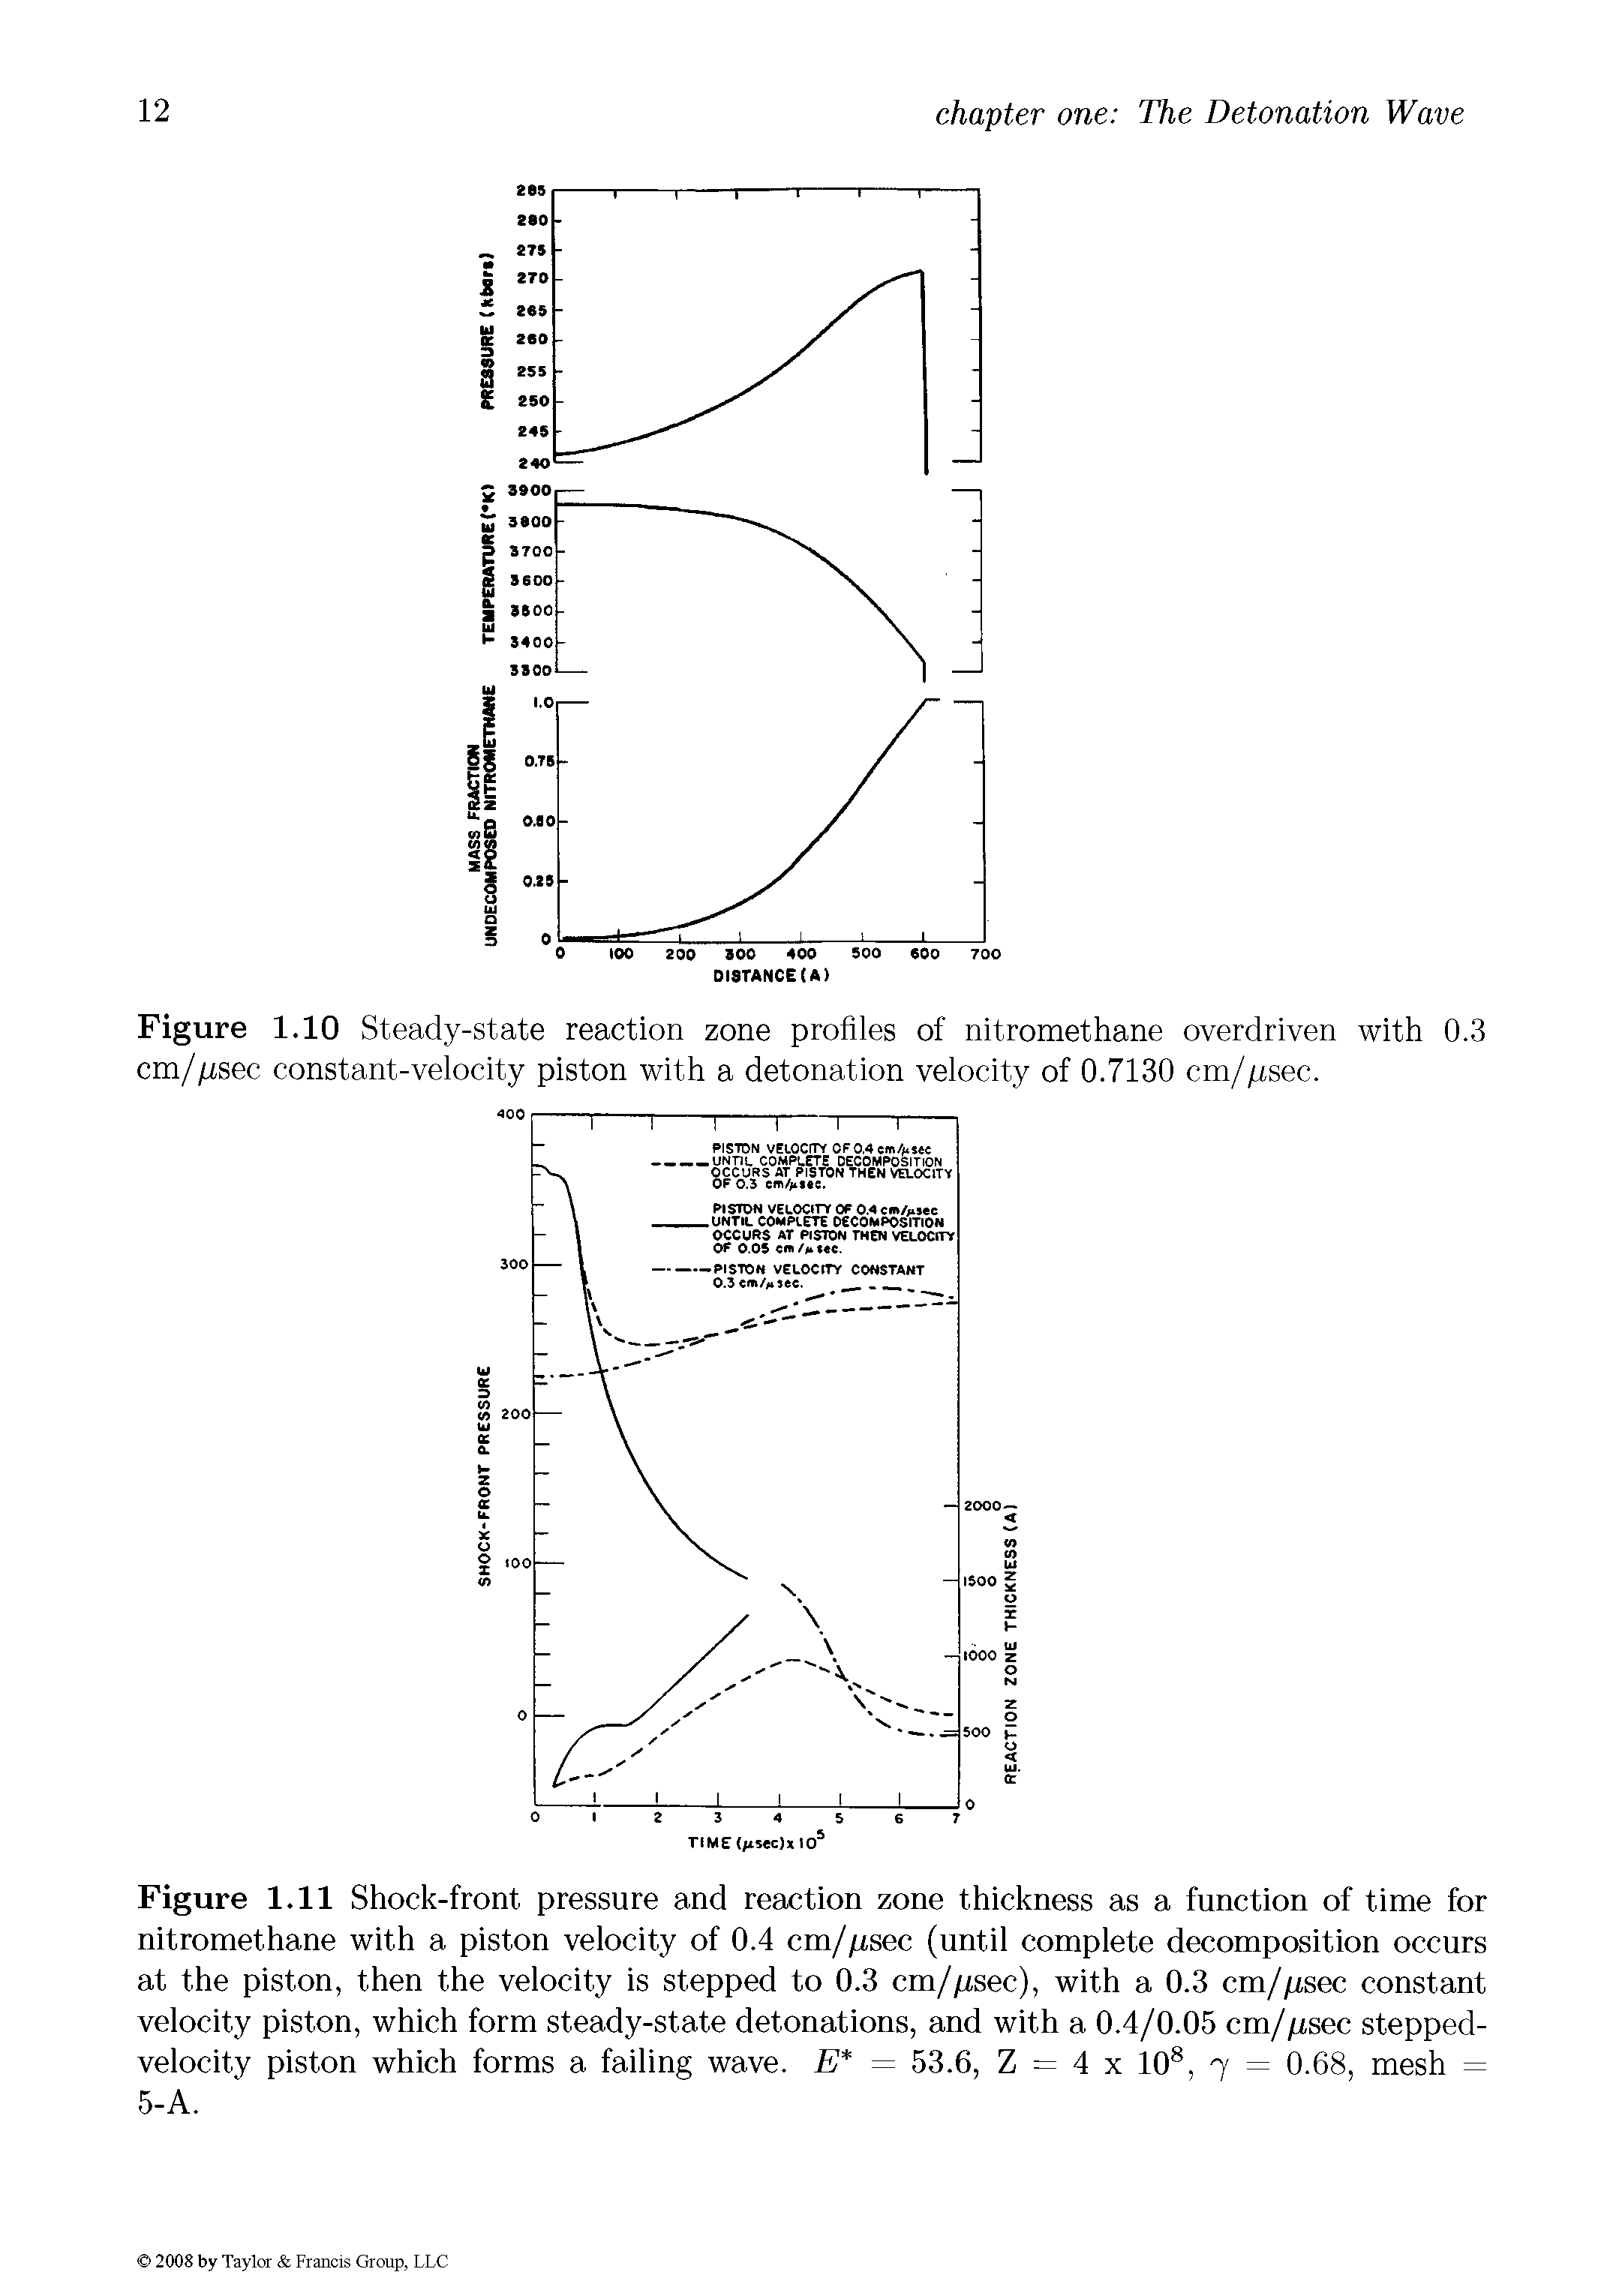 Figure 1.11 Shock-front pressure and reaction zone thickness as a function of time for nitromethane with a piston velocity of 0.4 cm/psec (until complete decomposition occurs at the piston, then the velocity is stepped to 0.3 cm/)usec), with a 0.3 cm/psec constant velocity piston, which form steady-state detonations, and with a 0.4/0.05 cm/psec stepped-velocity piston which forms a failing wave. E = 53.6, Z = 4 x 10, 7 = 0.68, mesh = 5-A.